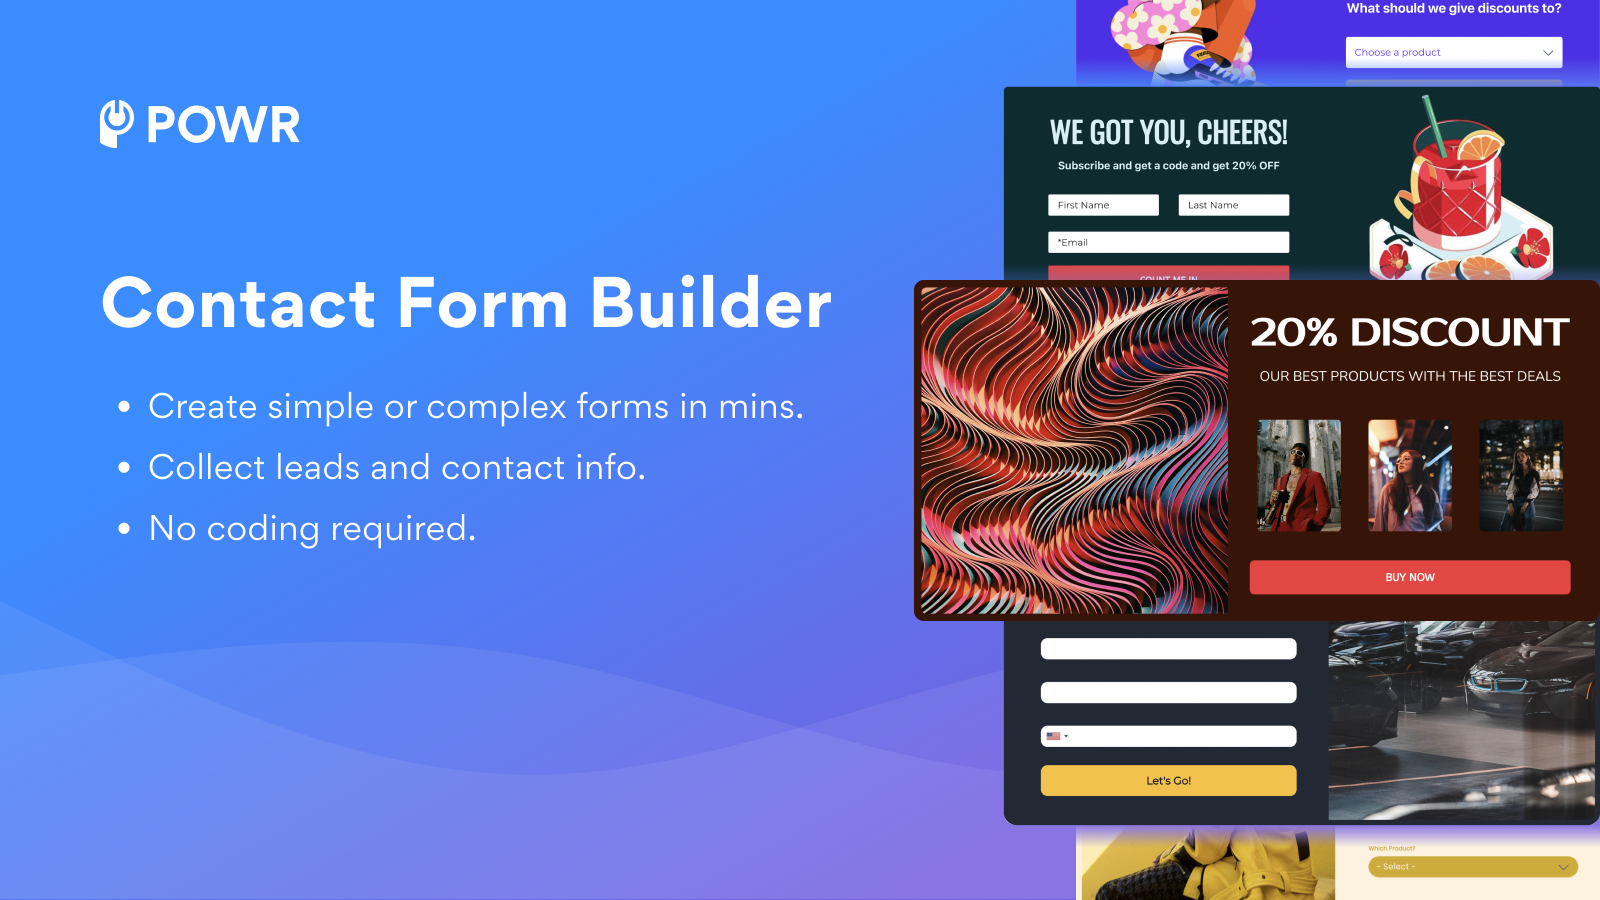 Contact form builder create forms, collect contacts, no coding